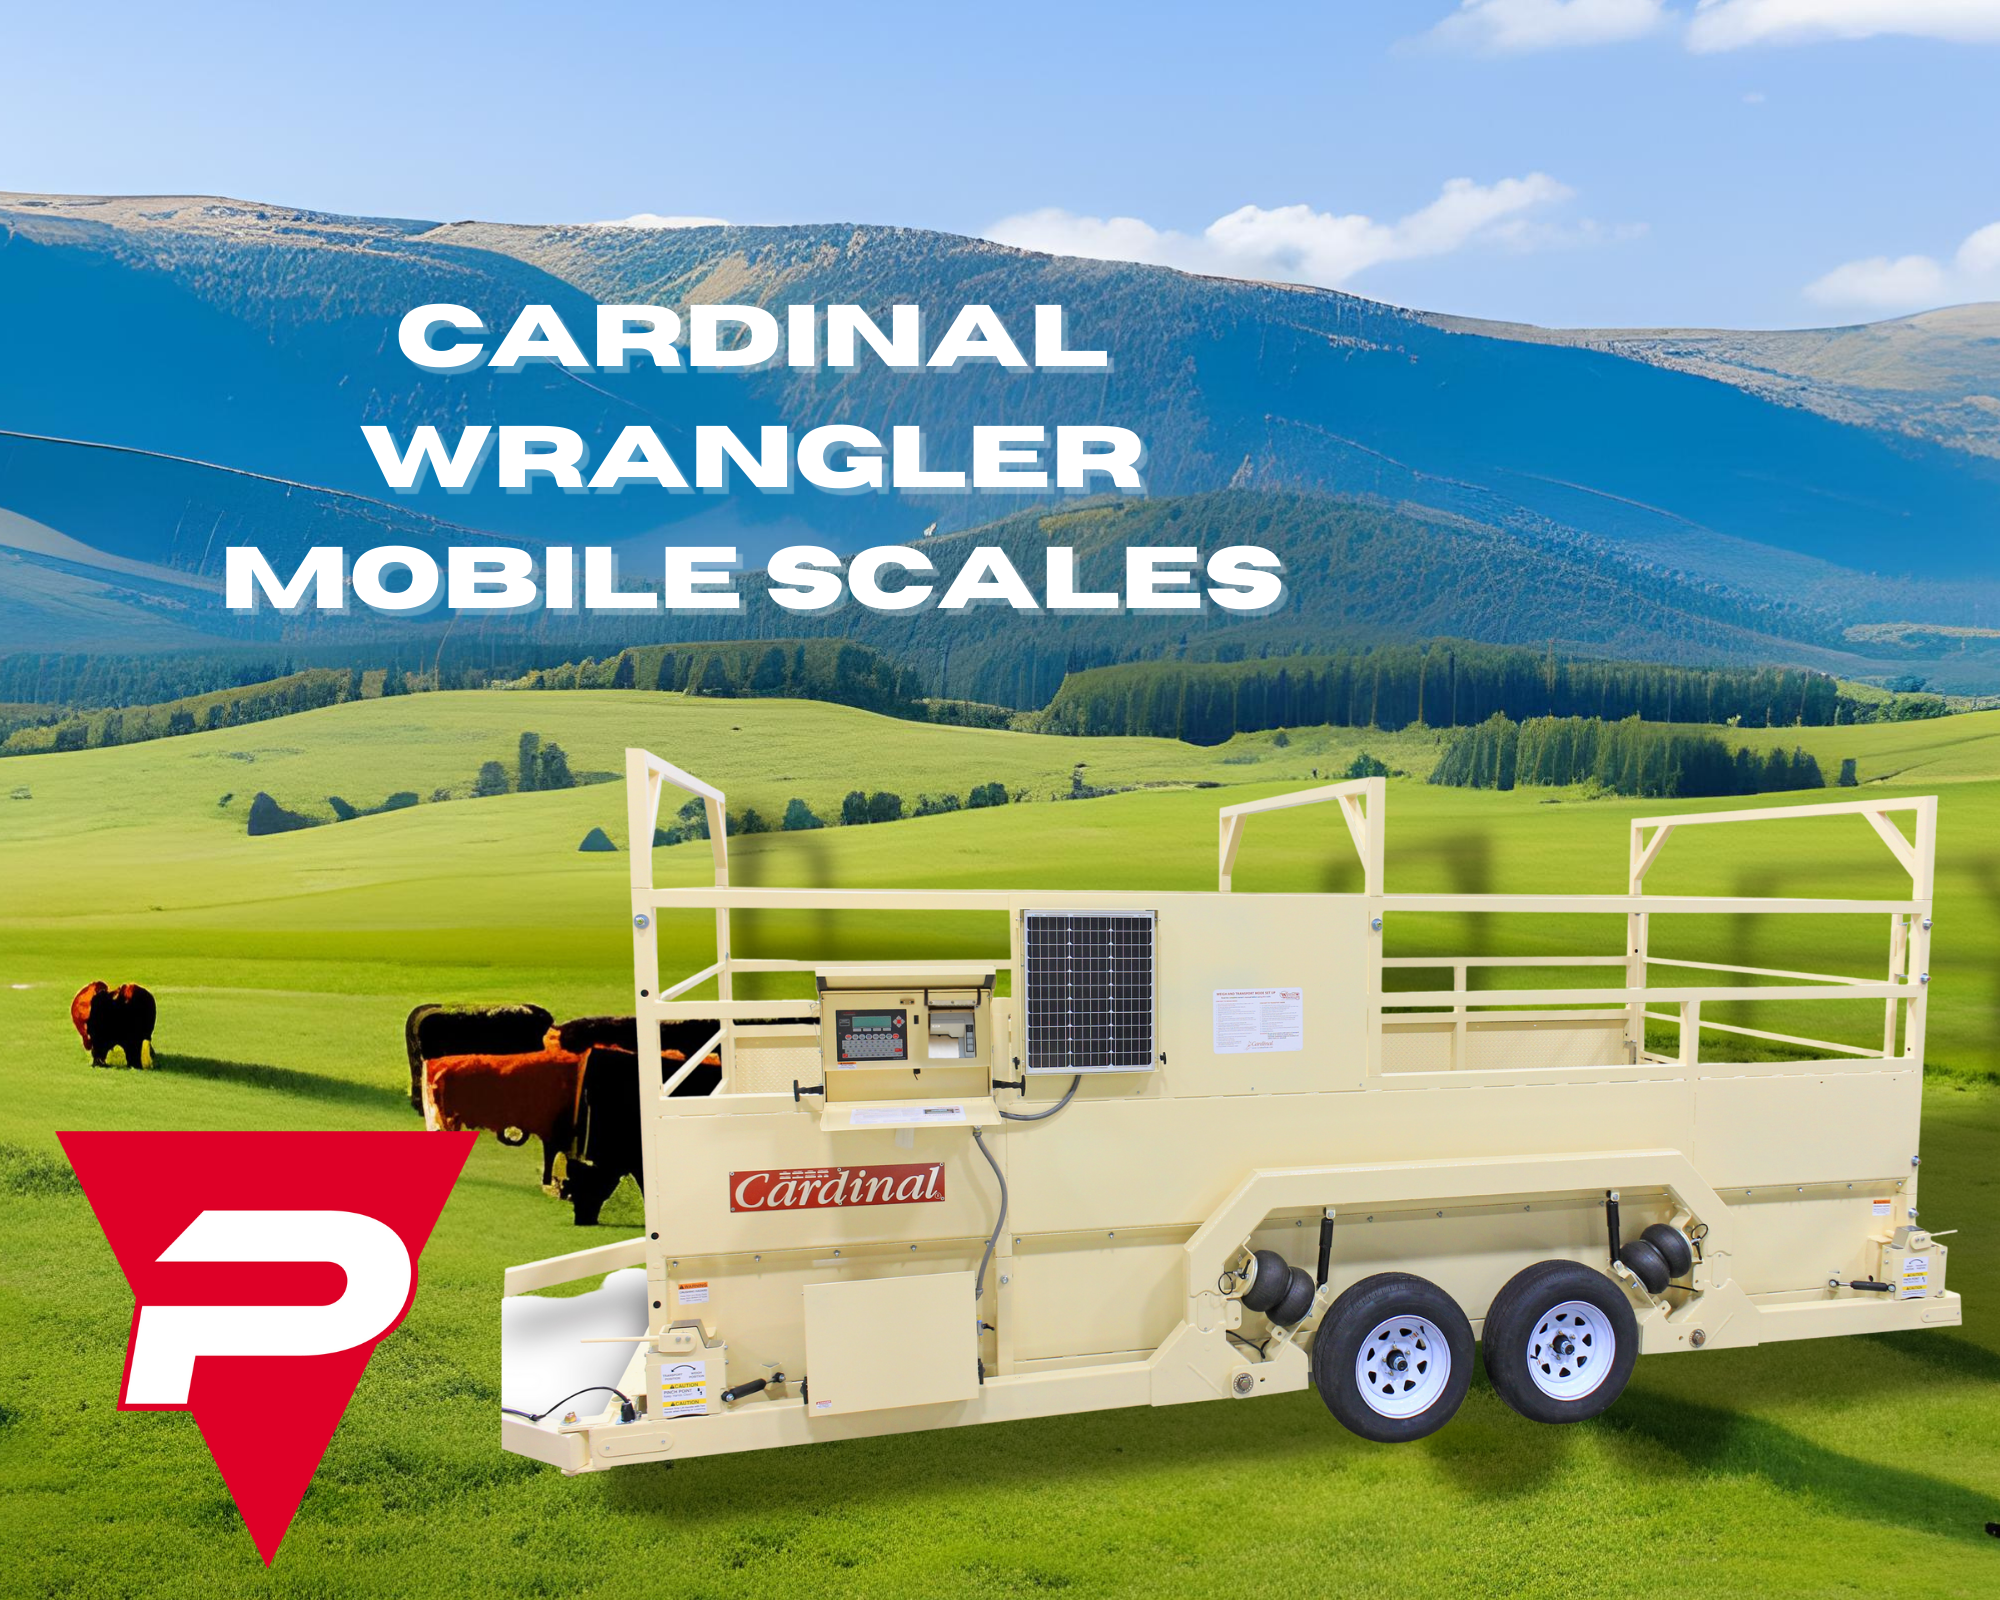 An image showing Cardinal Scale's mobile Weight Wrangler livestock scales, which are self-contained and legal-for-trade certified for use by ranchers and farmers. Available in 18-ft-long tandem axle or 13-ft-long single axle sizes, the scales can weigh groups of cattle up to 15-20 head at a time, with a maximum capacity of 20,000 lbs.